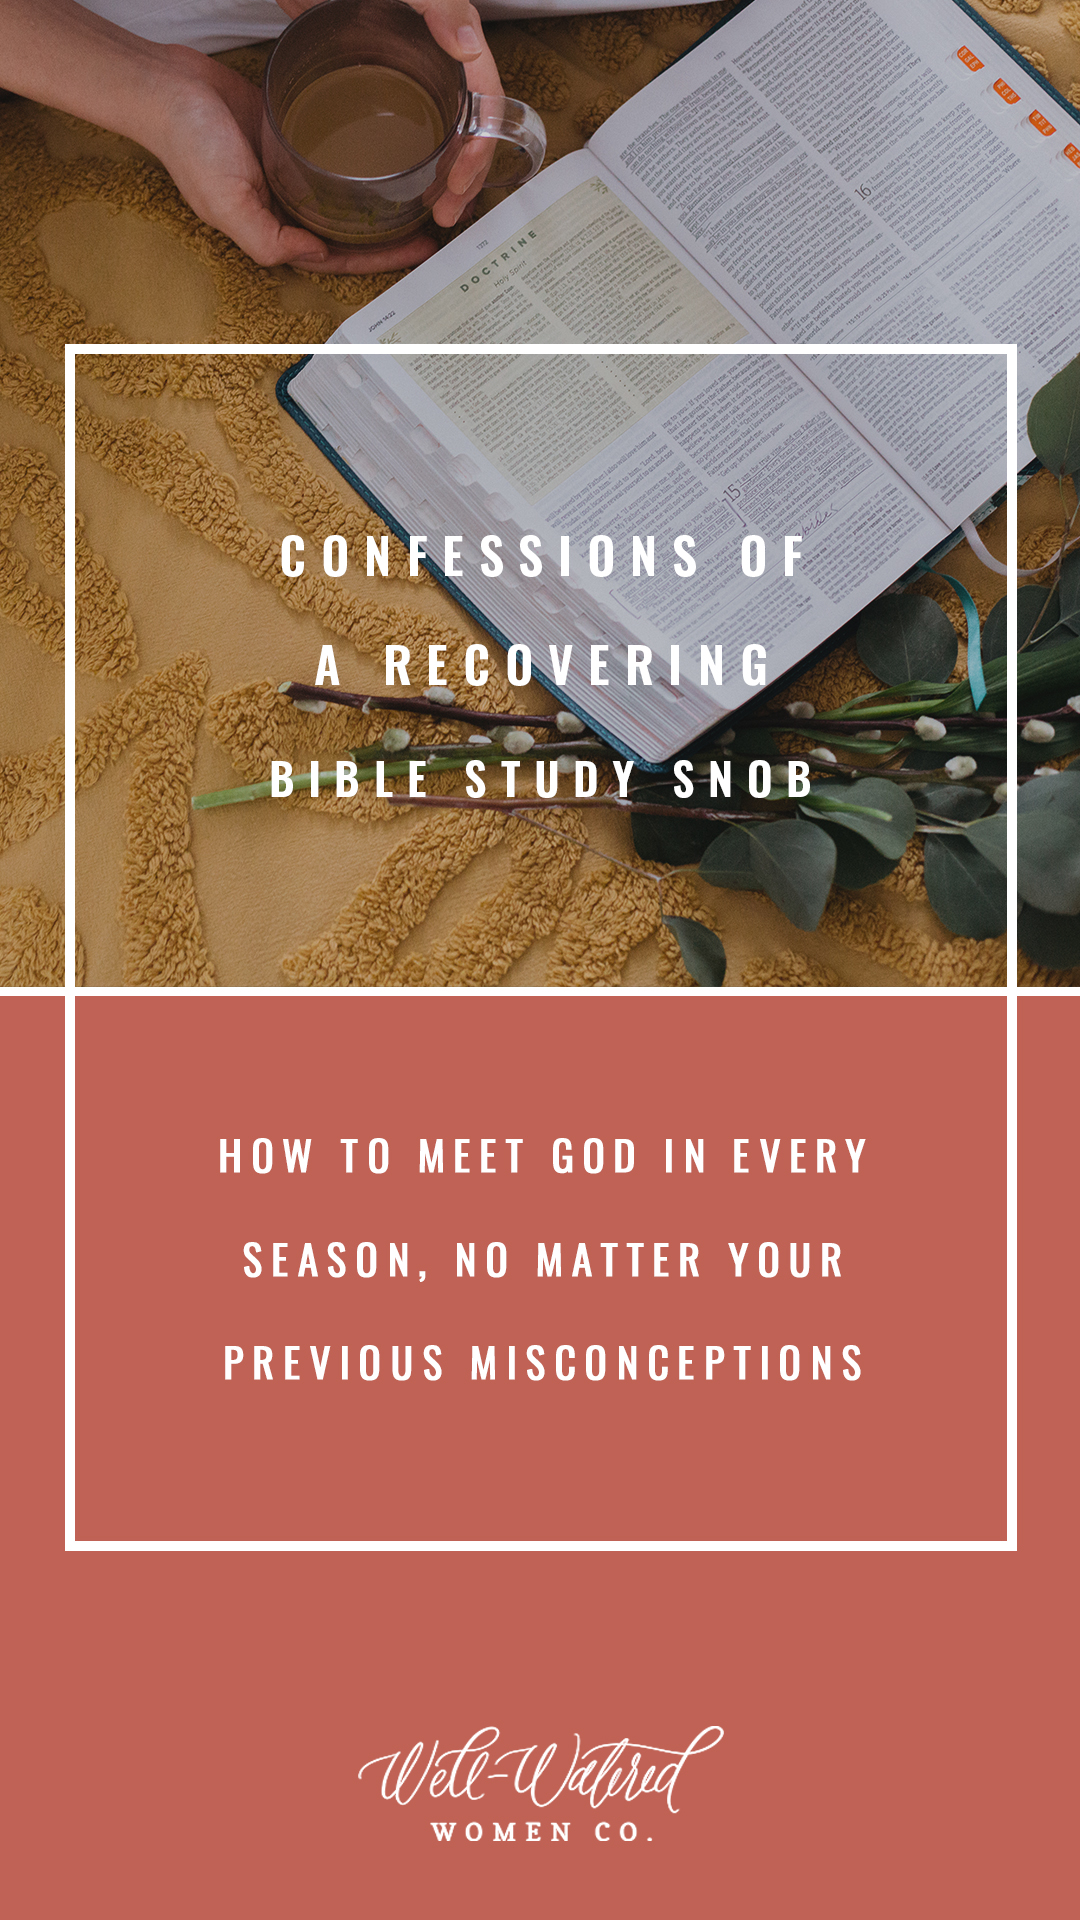 Well Watered Women Blog-Confessions of a Recovering Bible Study Snob - Meeting God in the Everyday